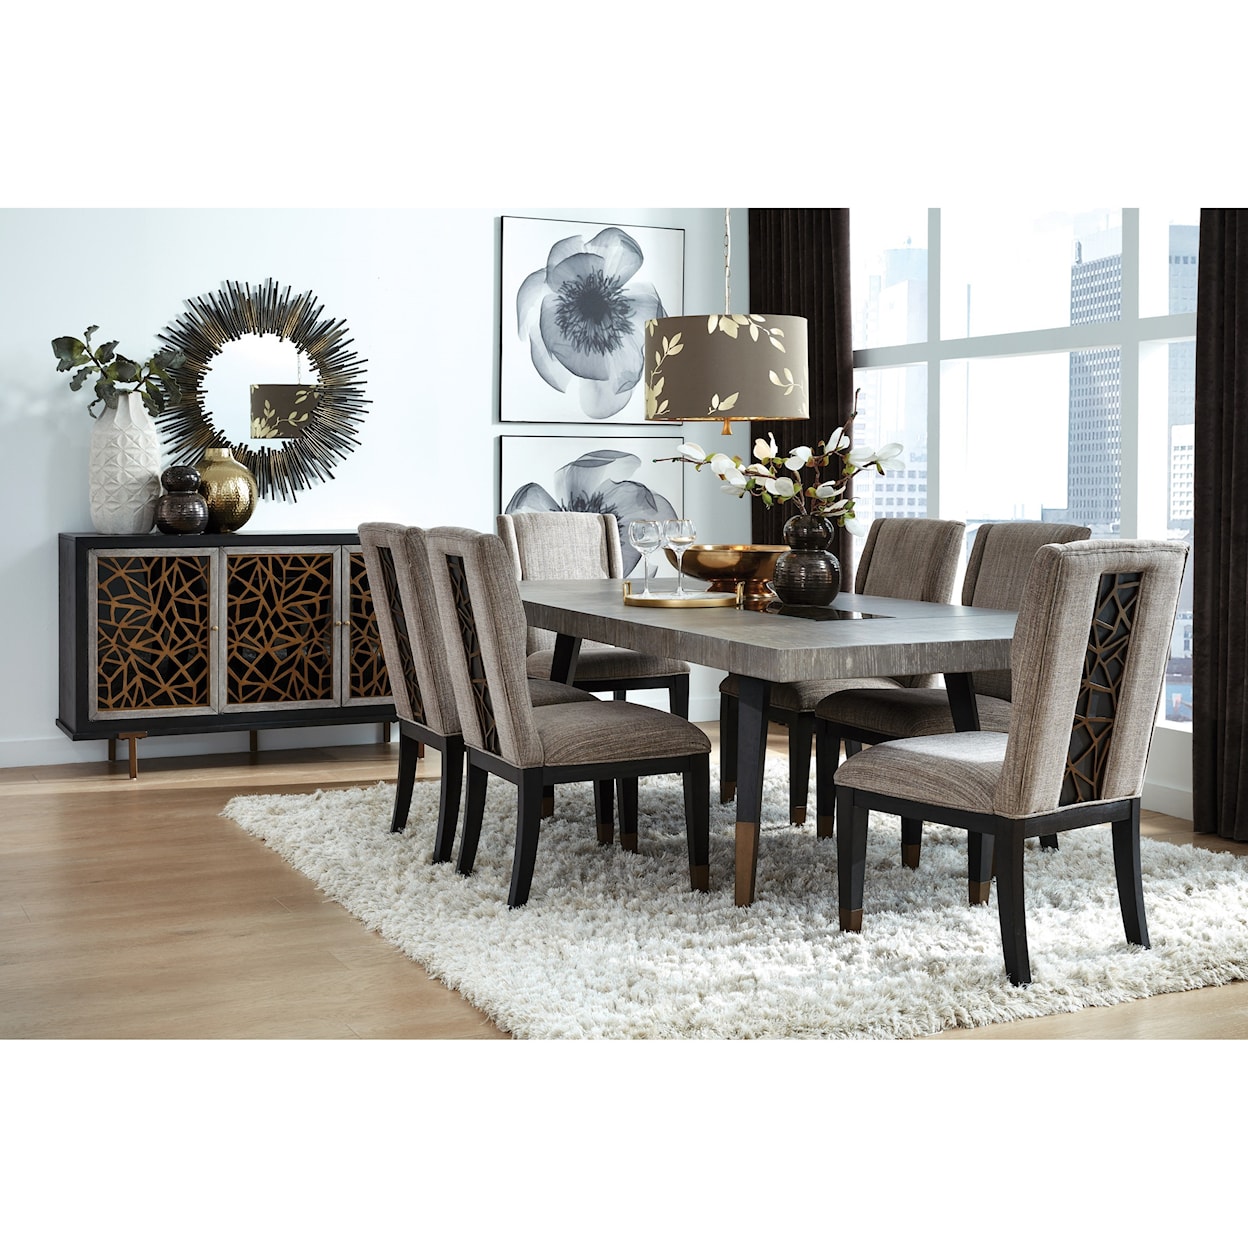 Magnussen Home Ryker Dining Formal Dining Group